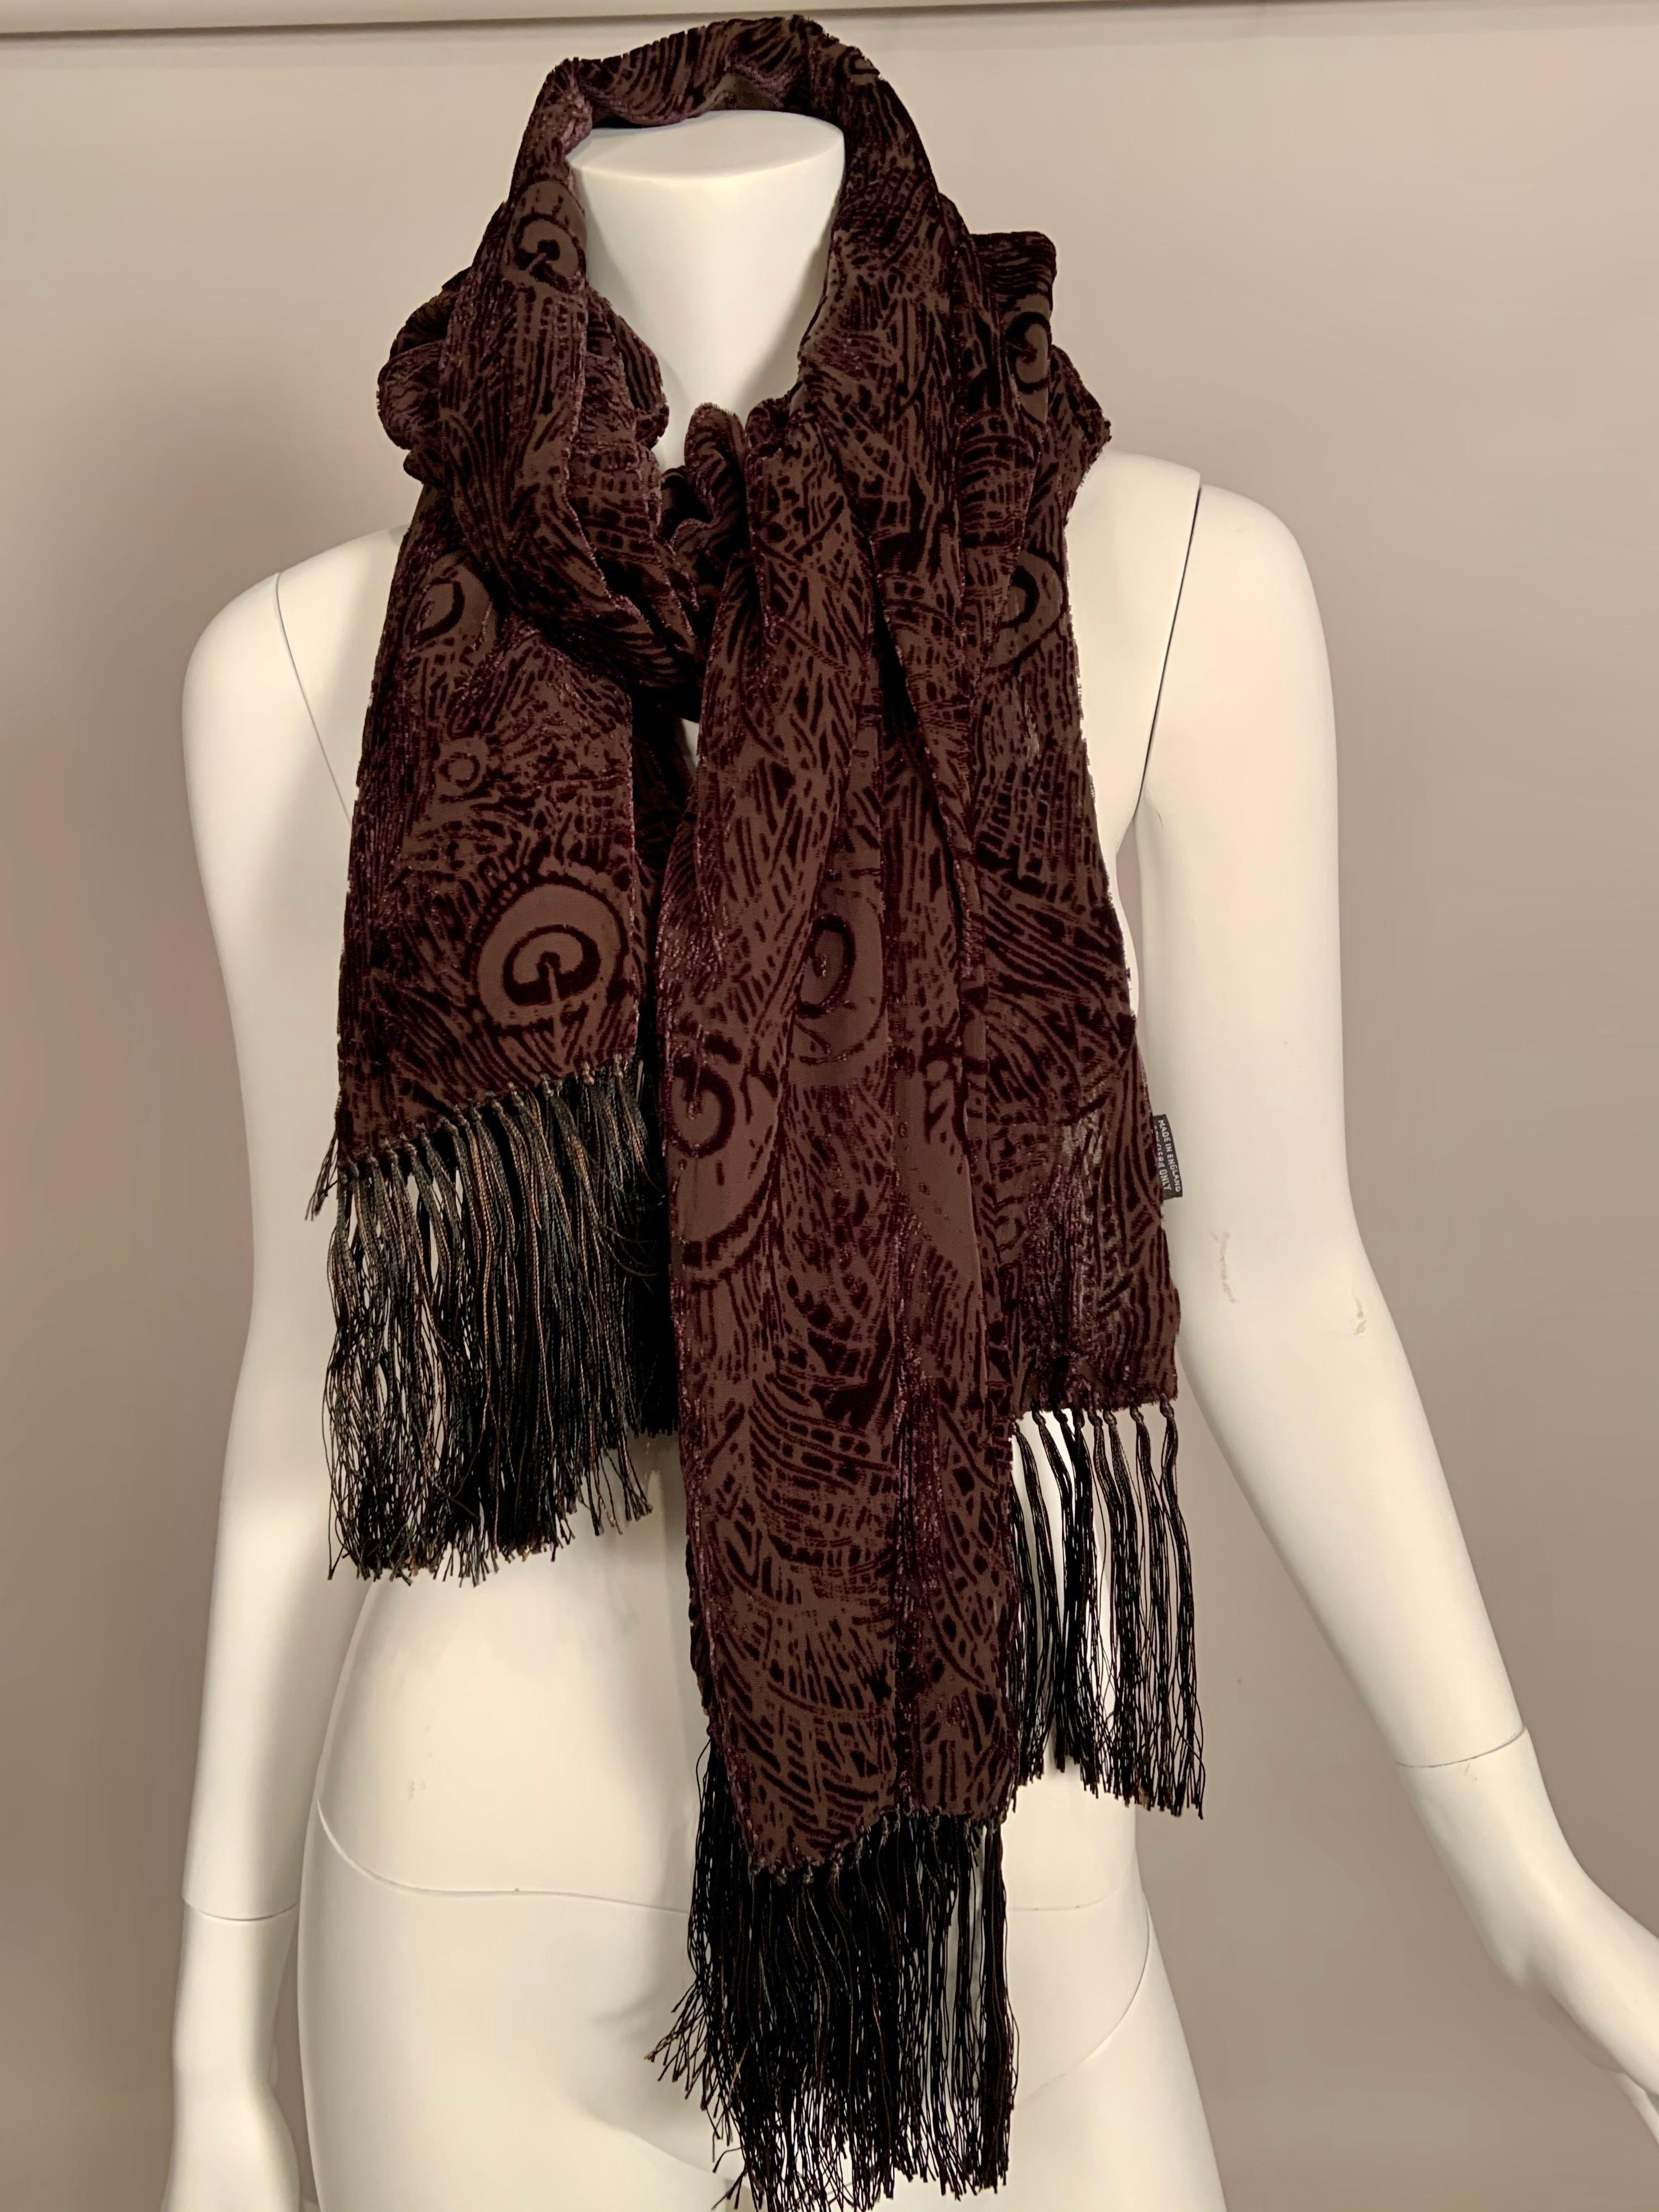 Women's Liberty Chocolate Brown Voided Velvet Fringed Shawl with Peacock Feather Design For Sale